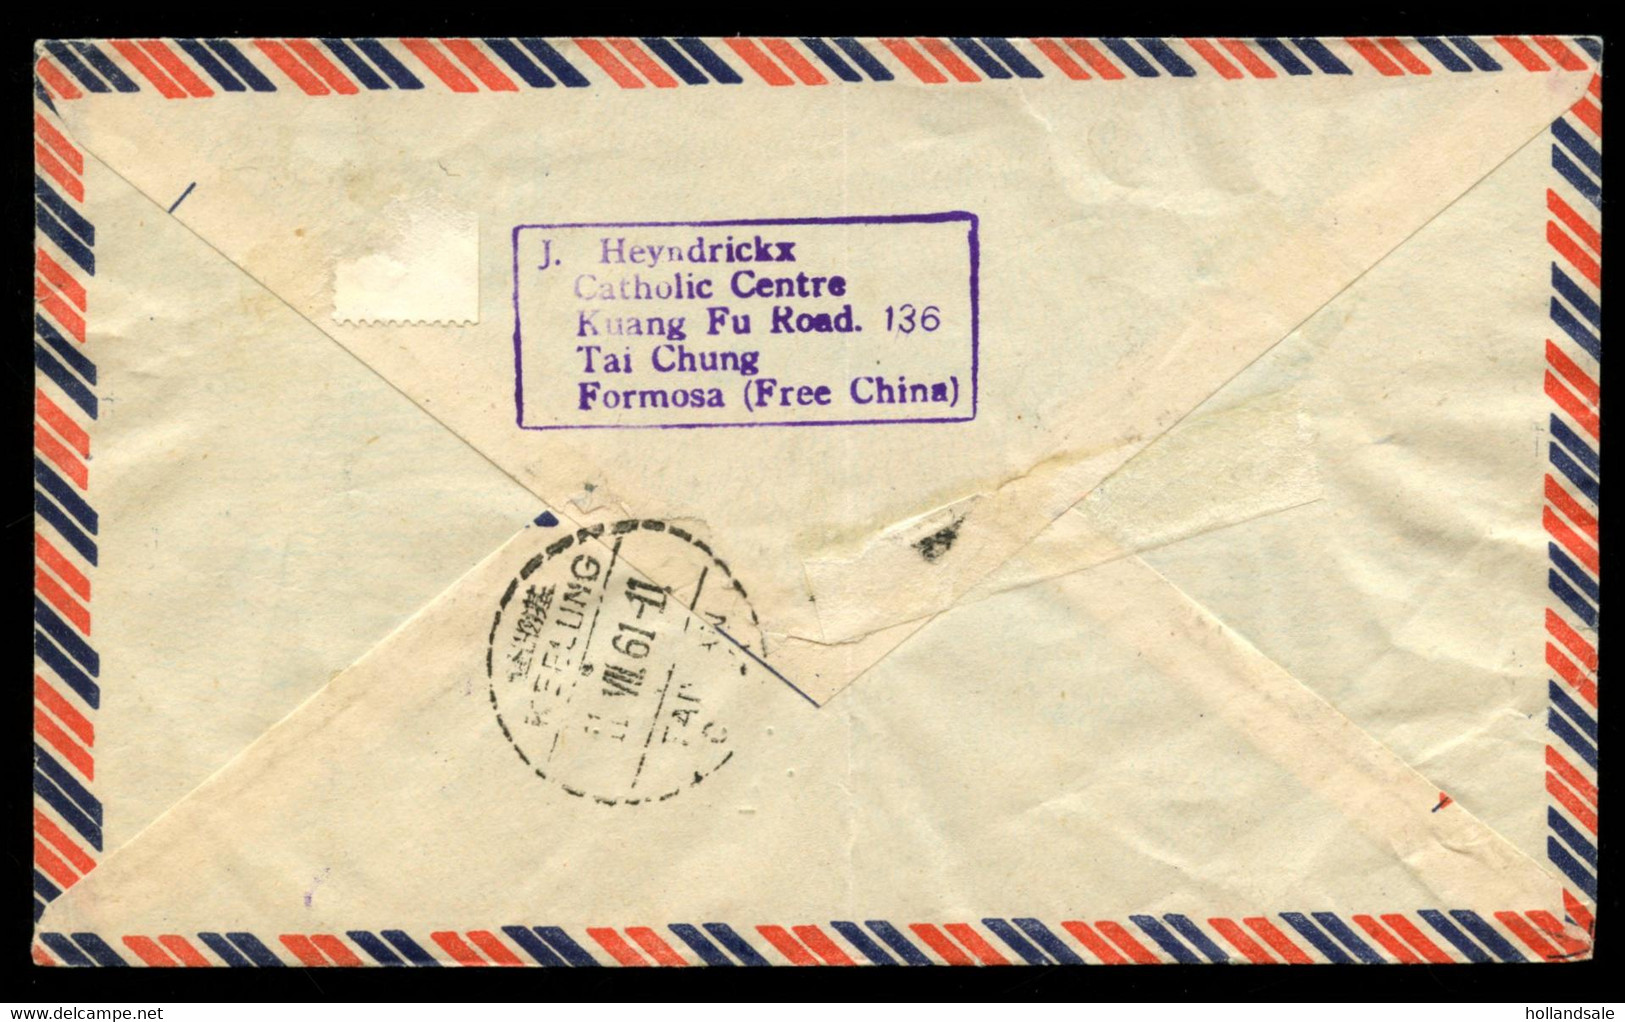 TAIWAN R.O.C. - 1961  Cover Sent From Catholic Centre, Tai Chung To Oud-Gastel, The Netherlands. - Covers & Documents